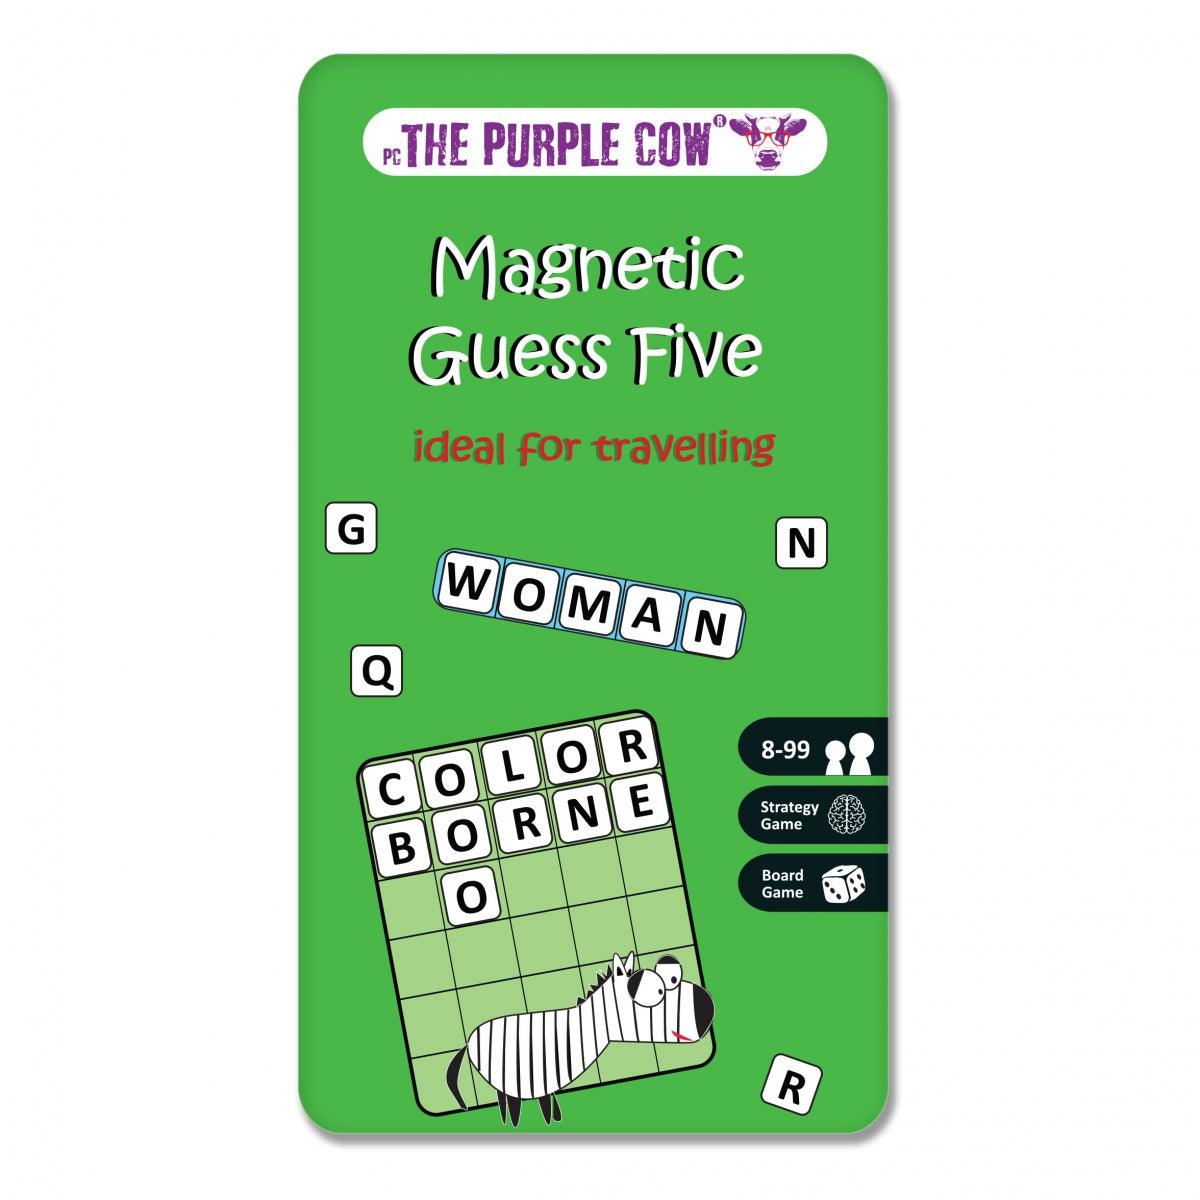 The Purple Cow: Magnetic Travel Game Guess Five